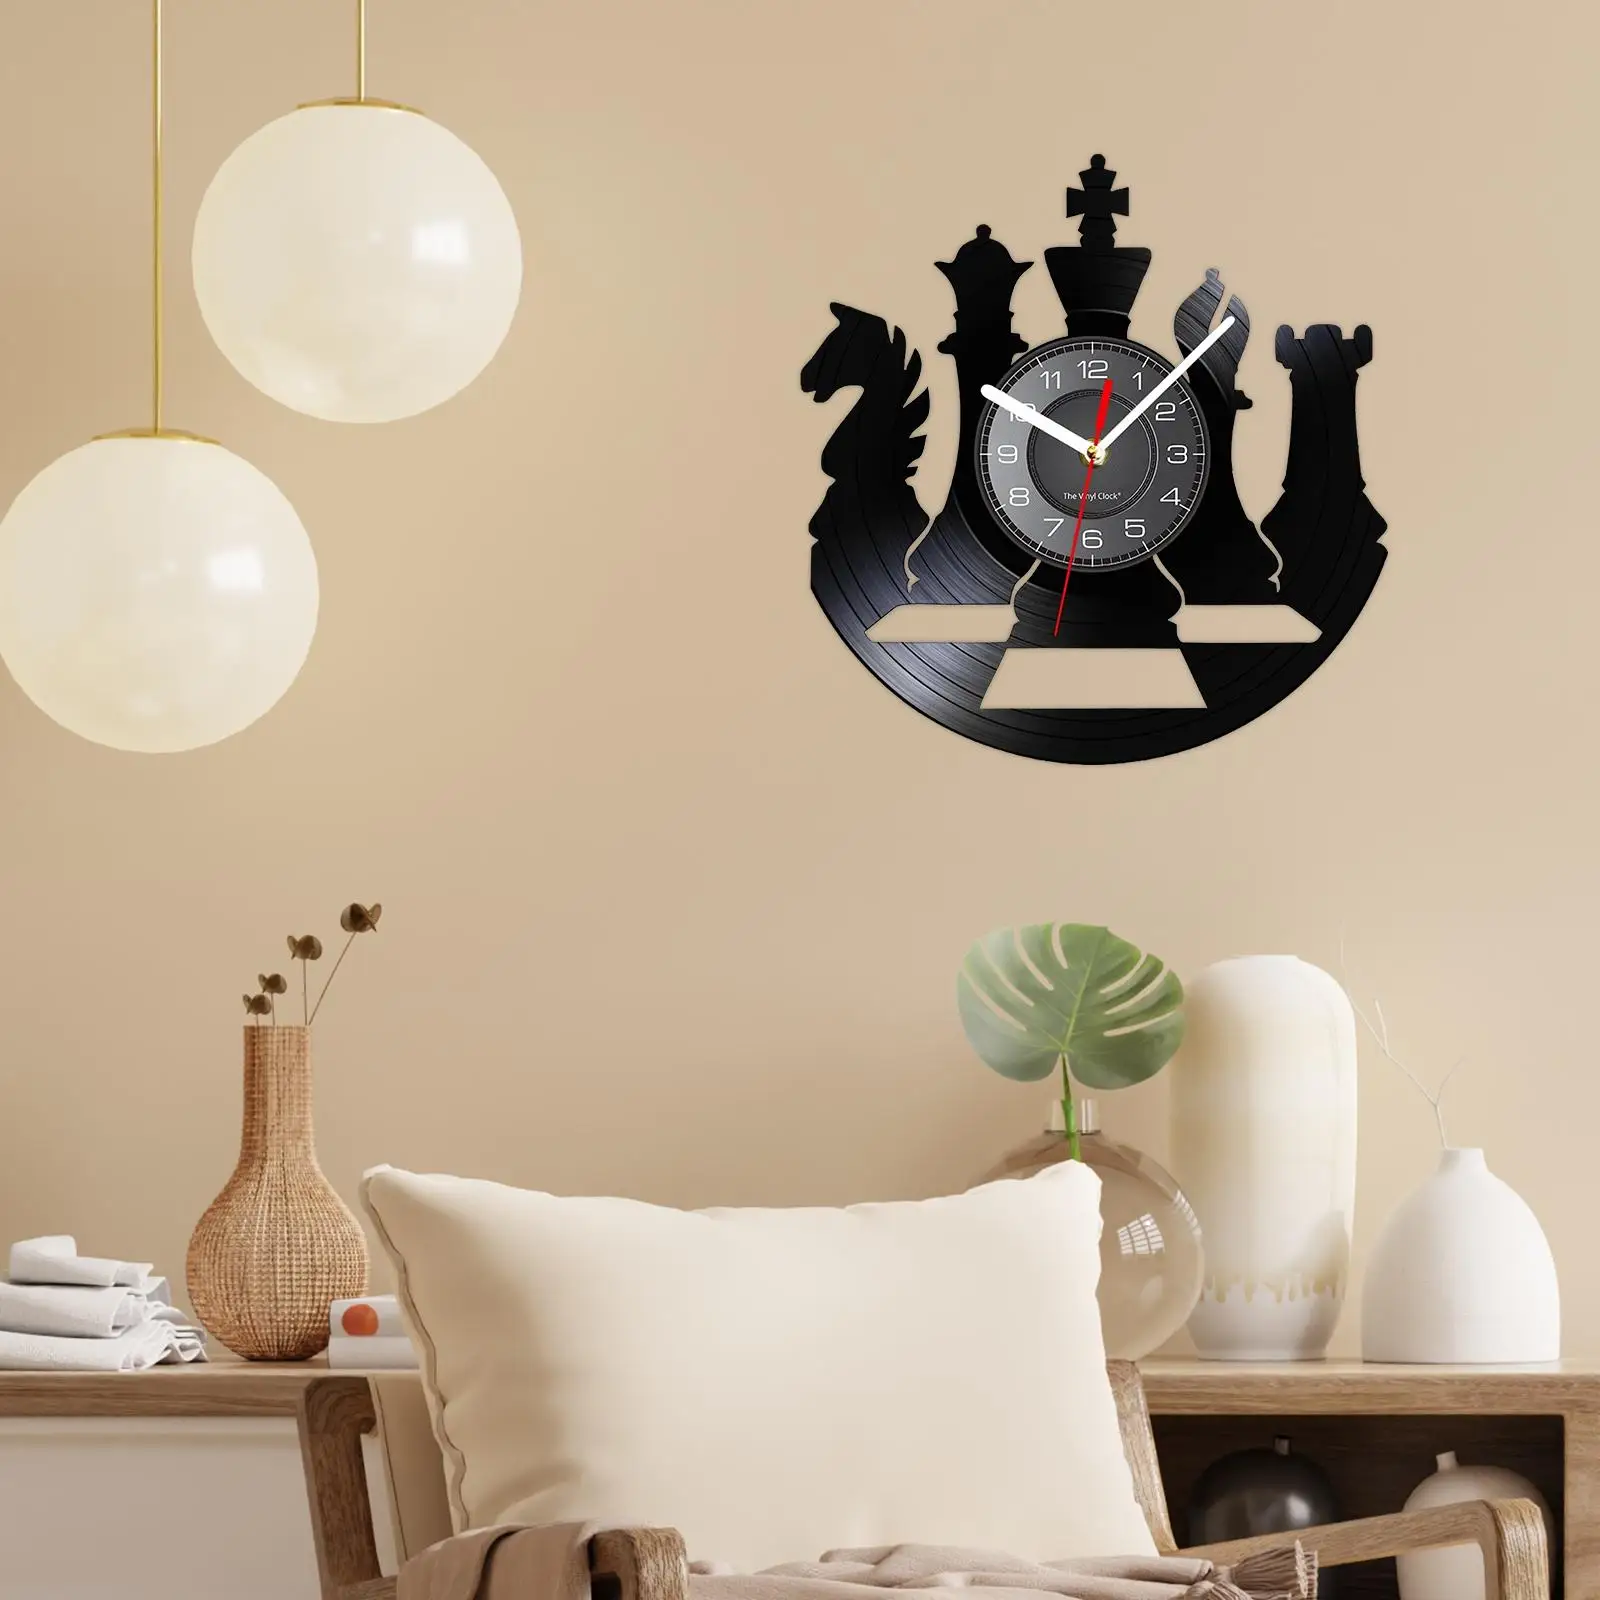  Record Wall Clock Light Luxury Silent Creative 12inch Vintage Style Clocks for Gift Indoor Restaurant Living Room Kitchen